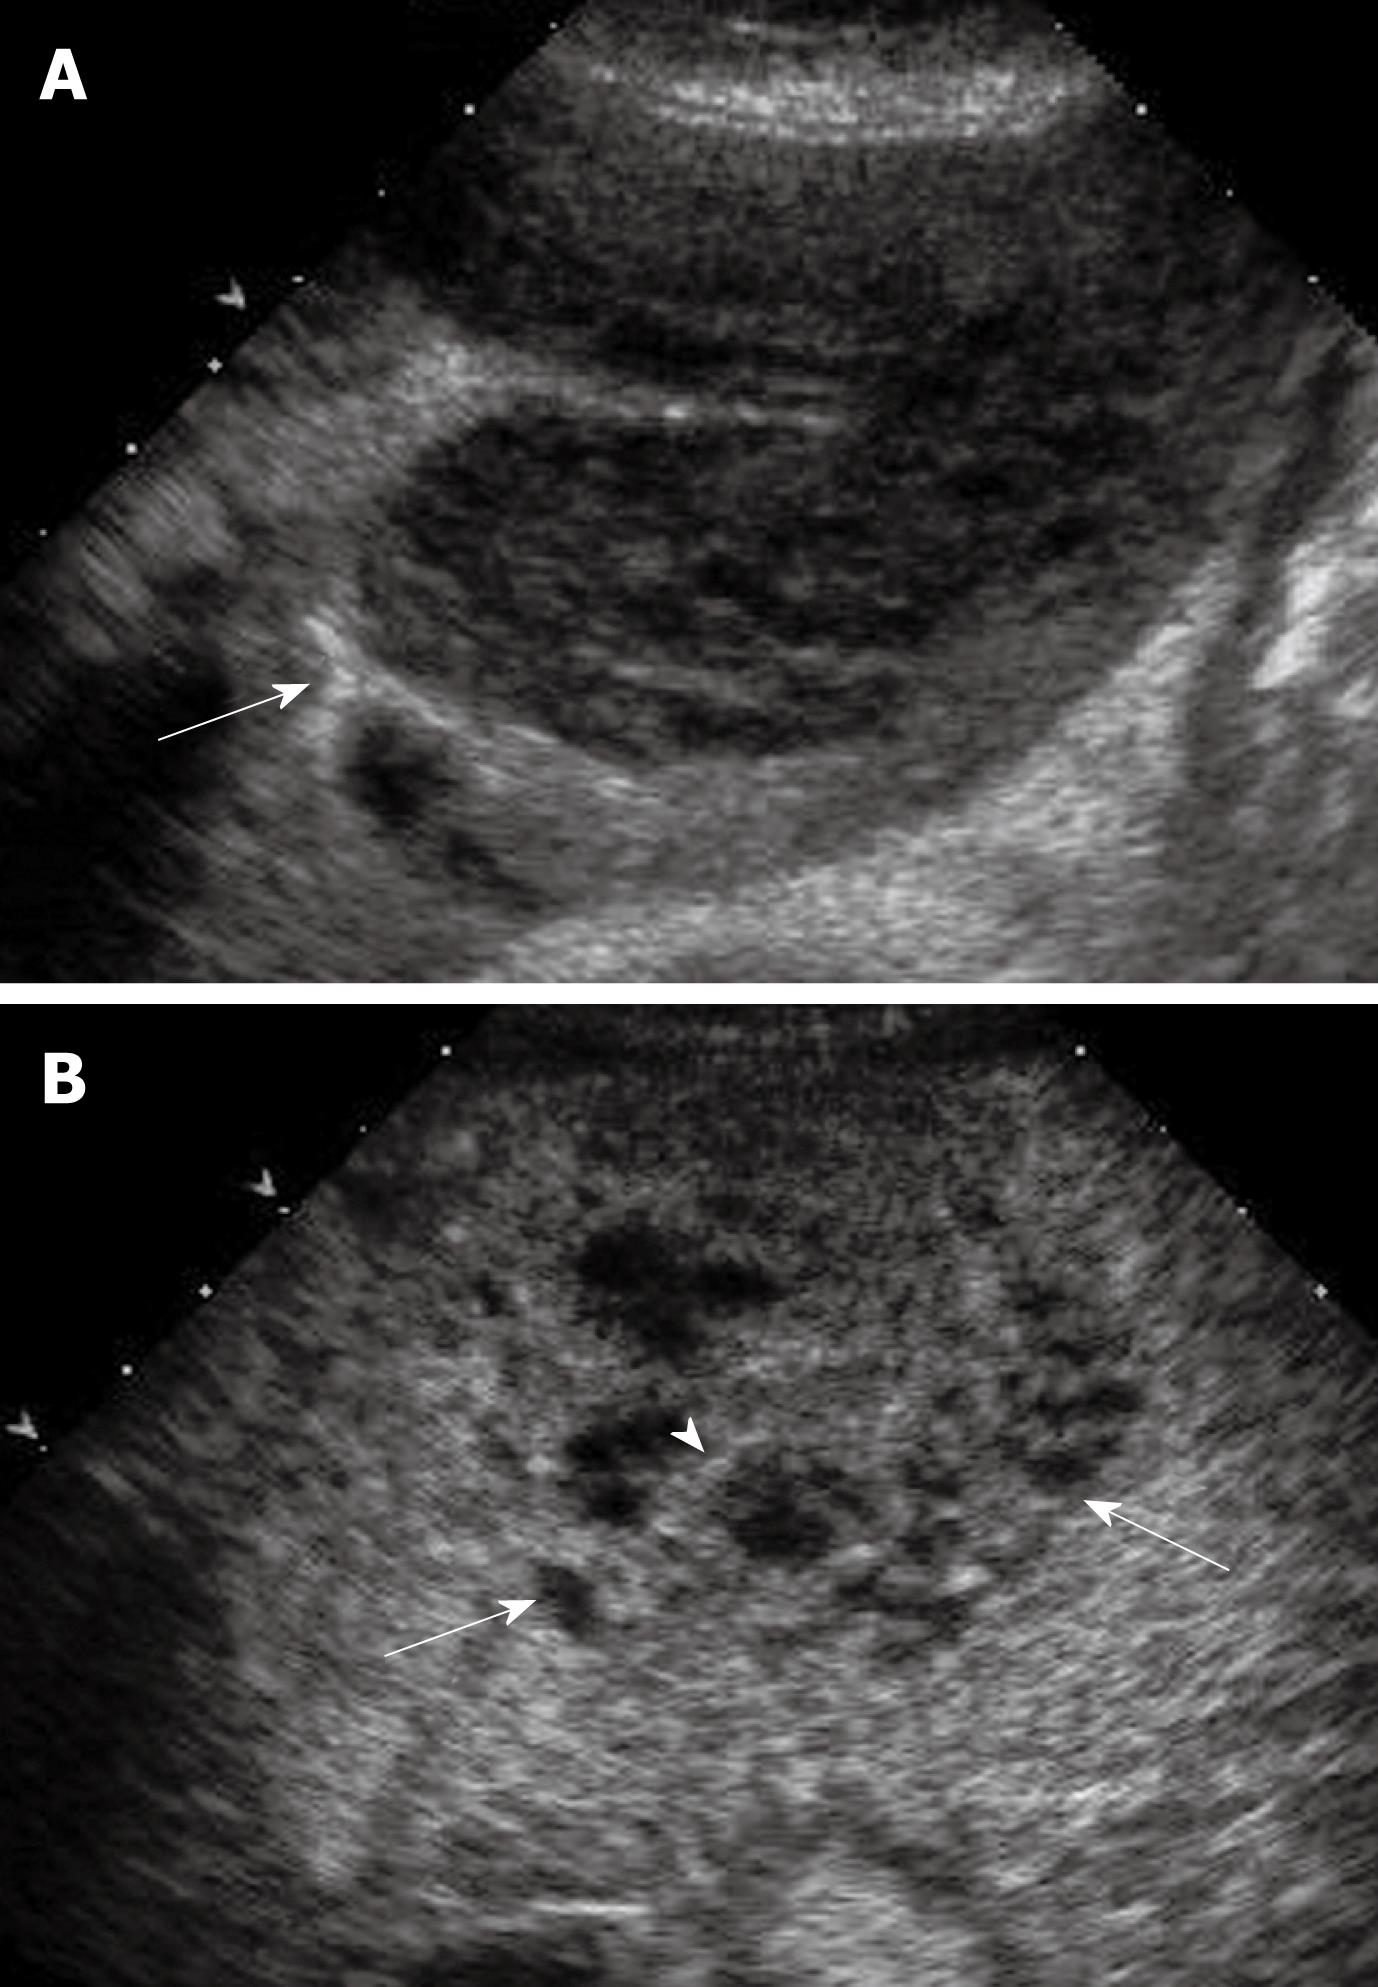 Lui Sprong bestellen Detection Of Focal Liver Lesions In Cirrhotic Liver Using Contrast-Enhanced  Ultrasound